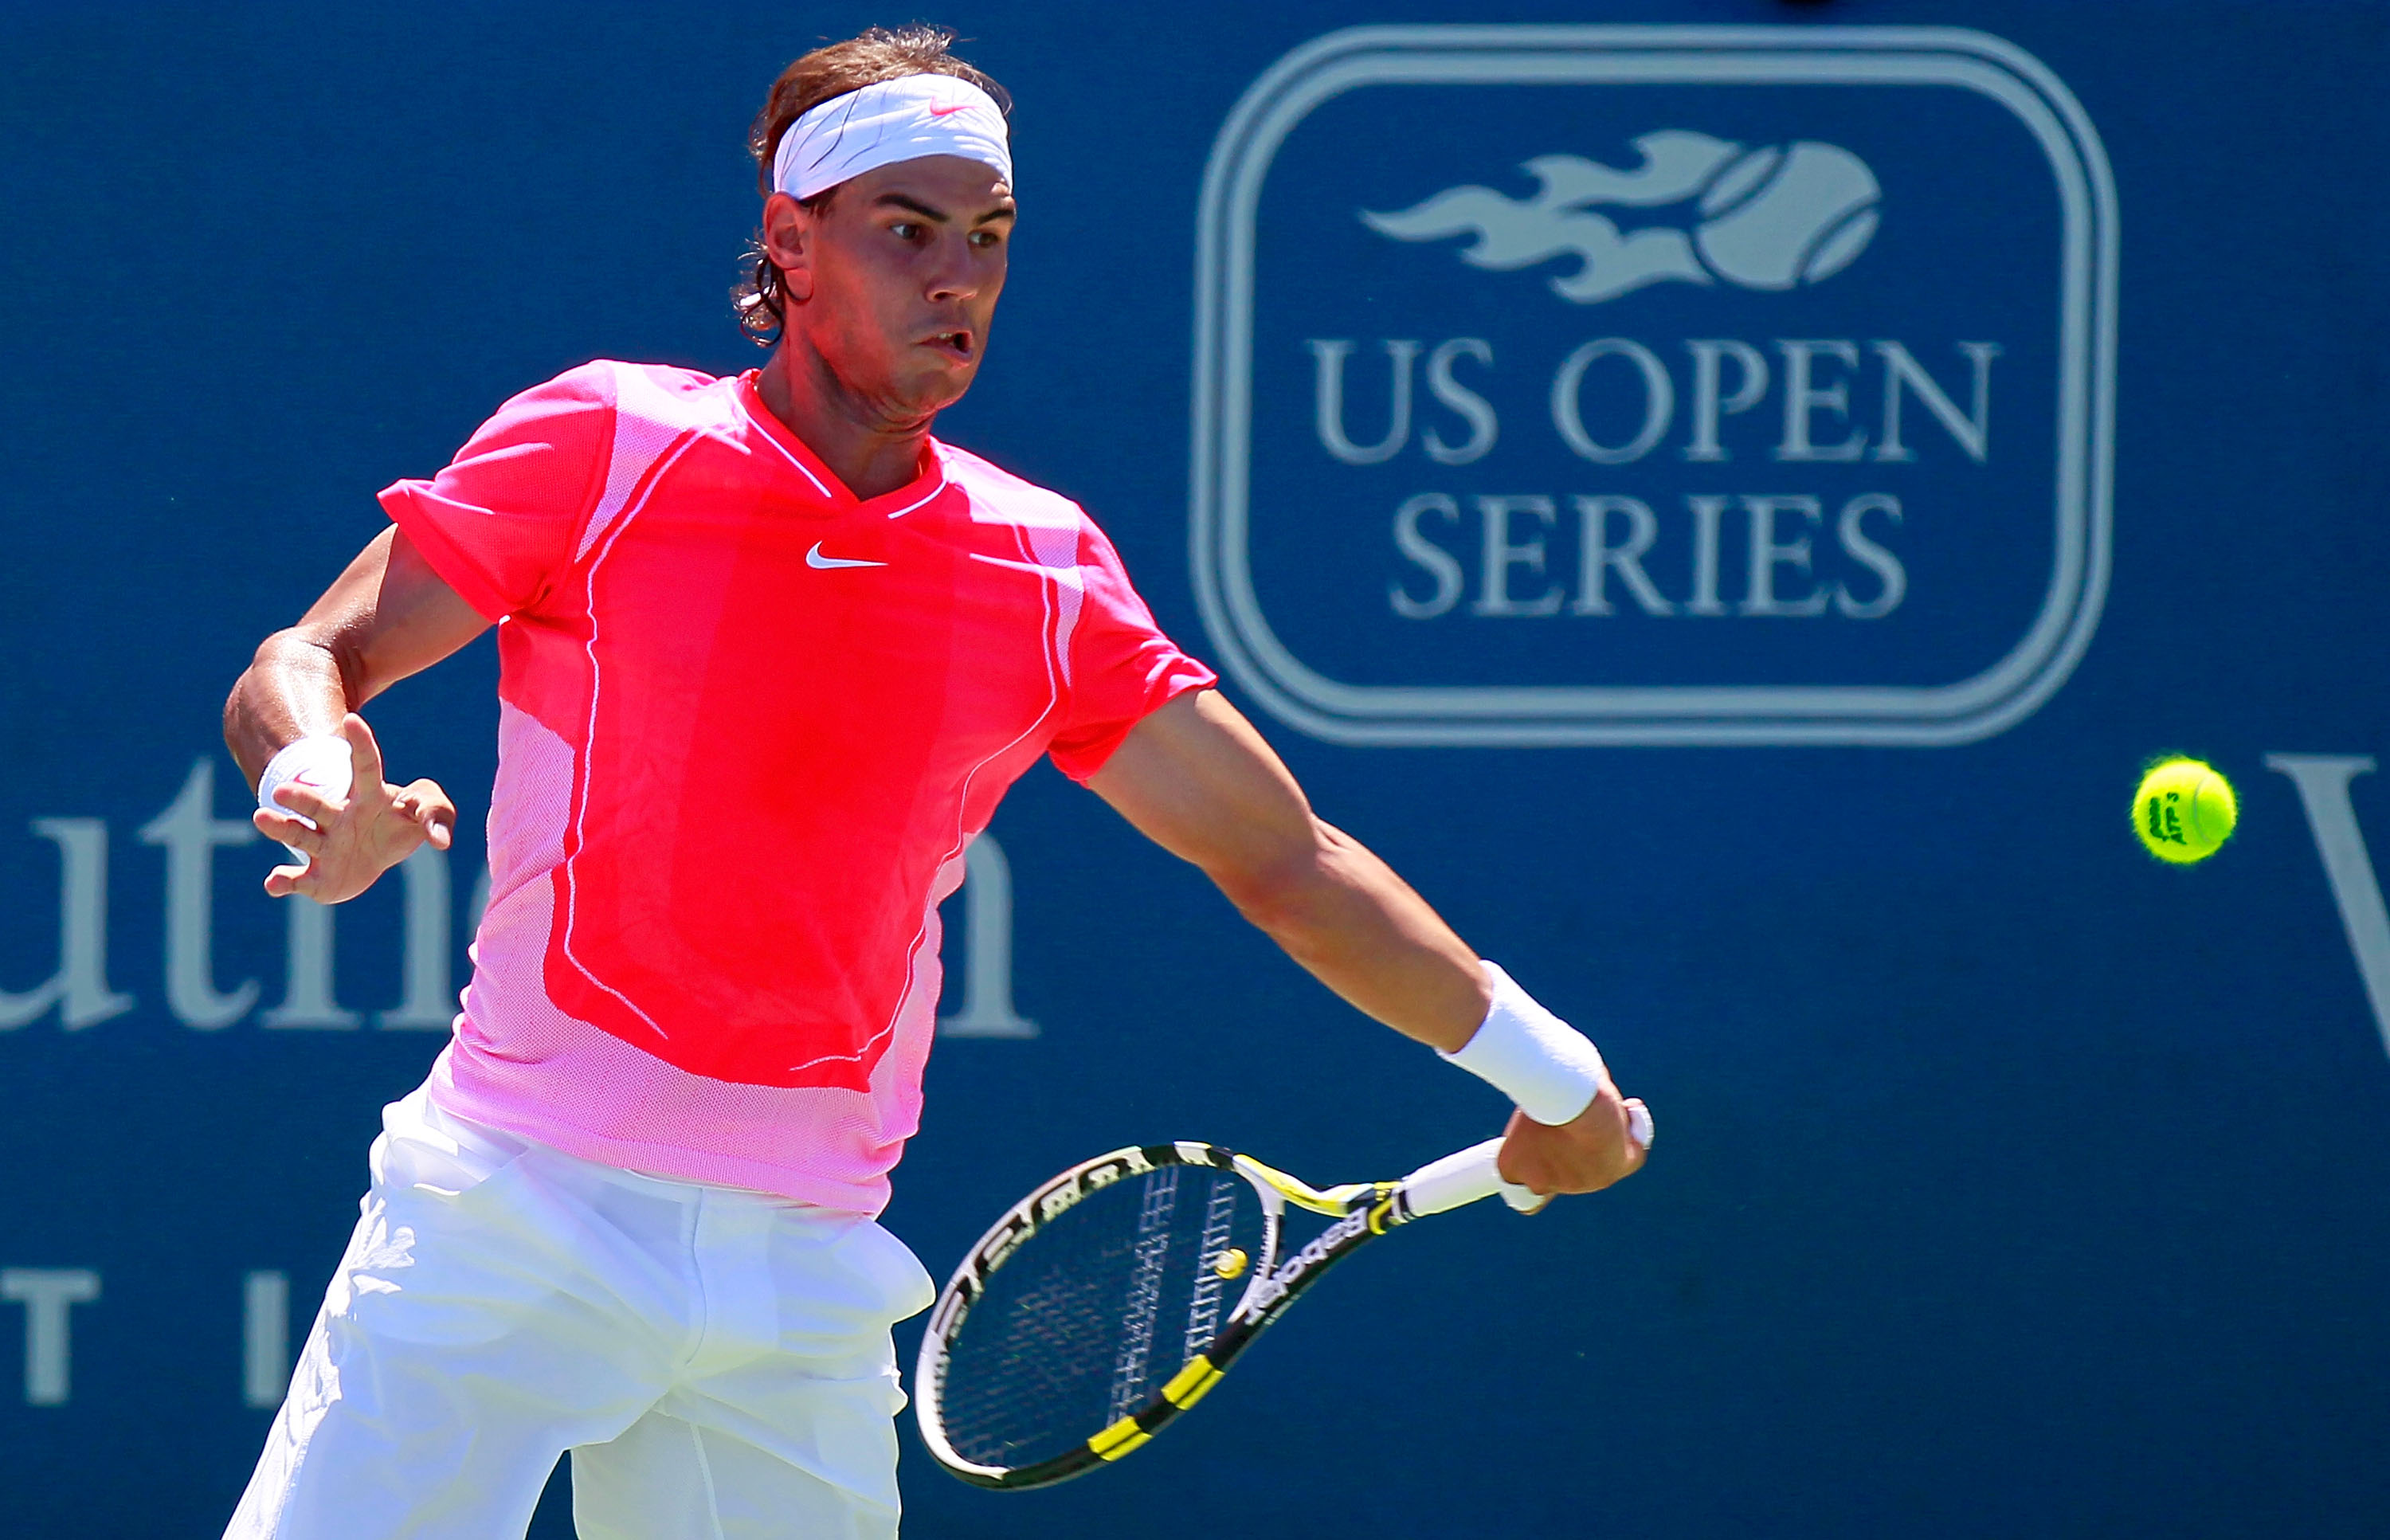 Do not be fooled by the pink. Rafael Nadal is a serious threat to Federer's legacy.